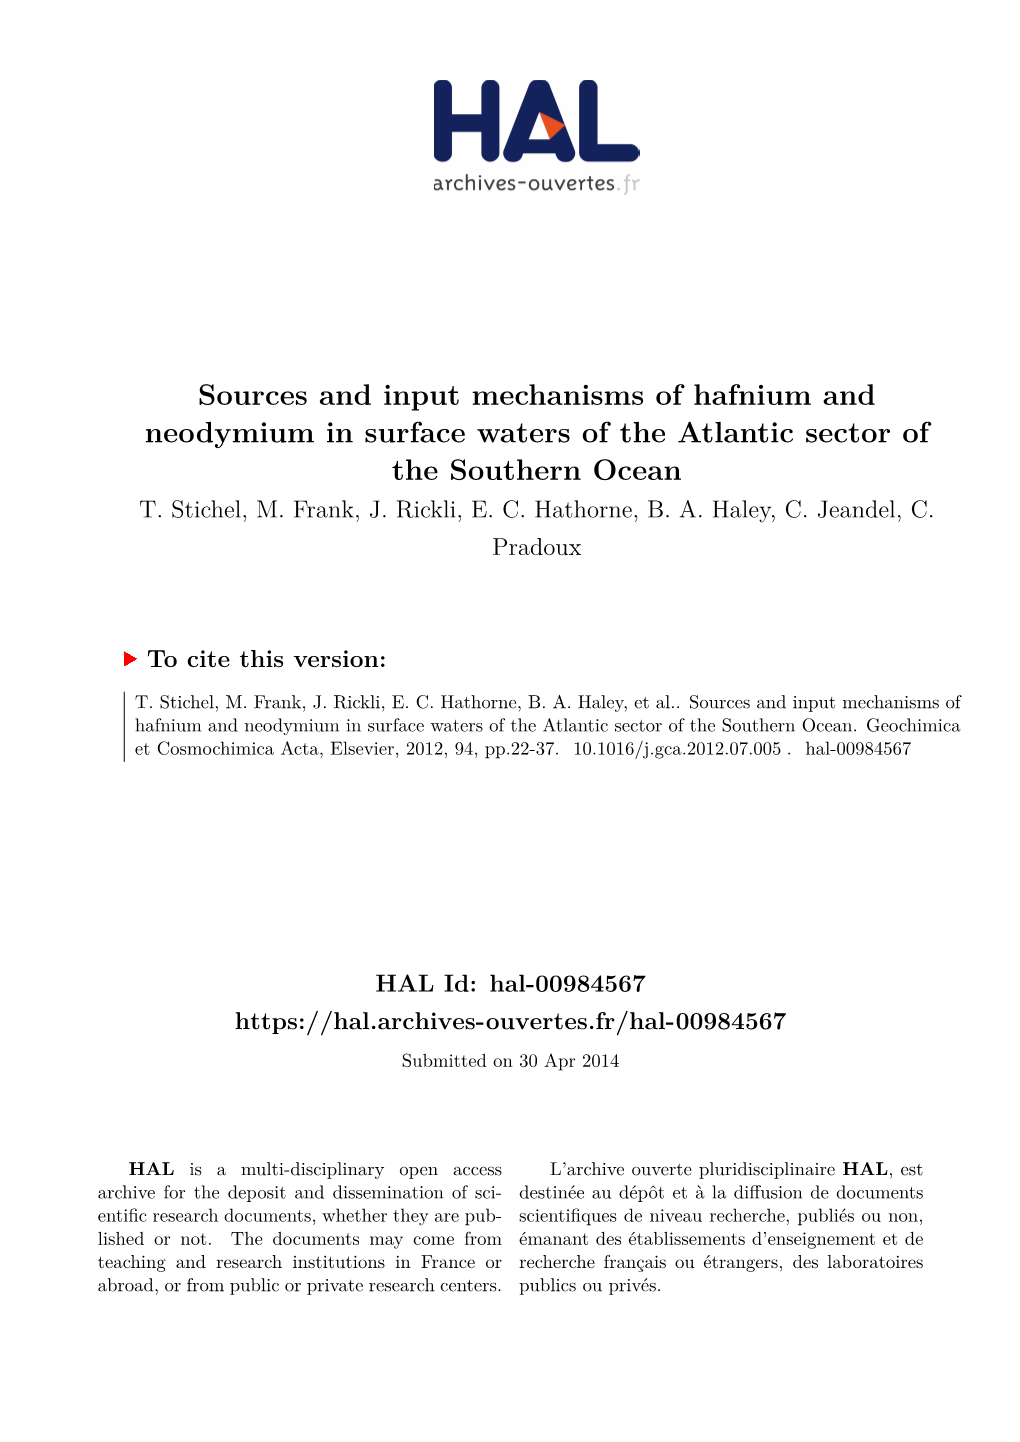 Sources and Input Mechanisms of Hafnium and Neodymium in Surface Waters of the Atlantic Sector of the Southern Ocean T